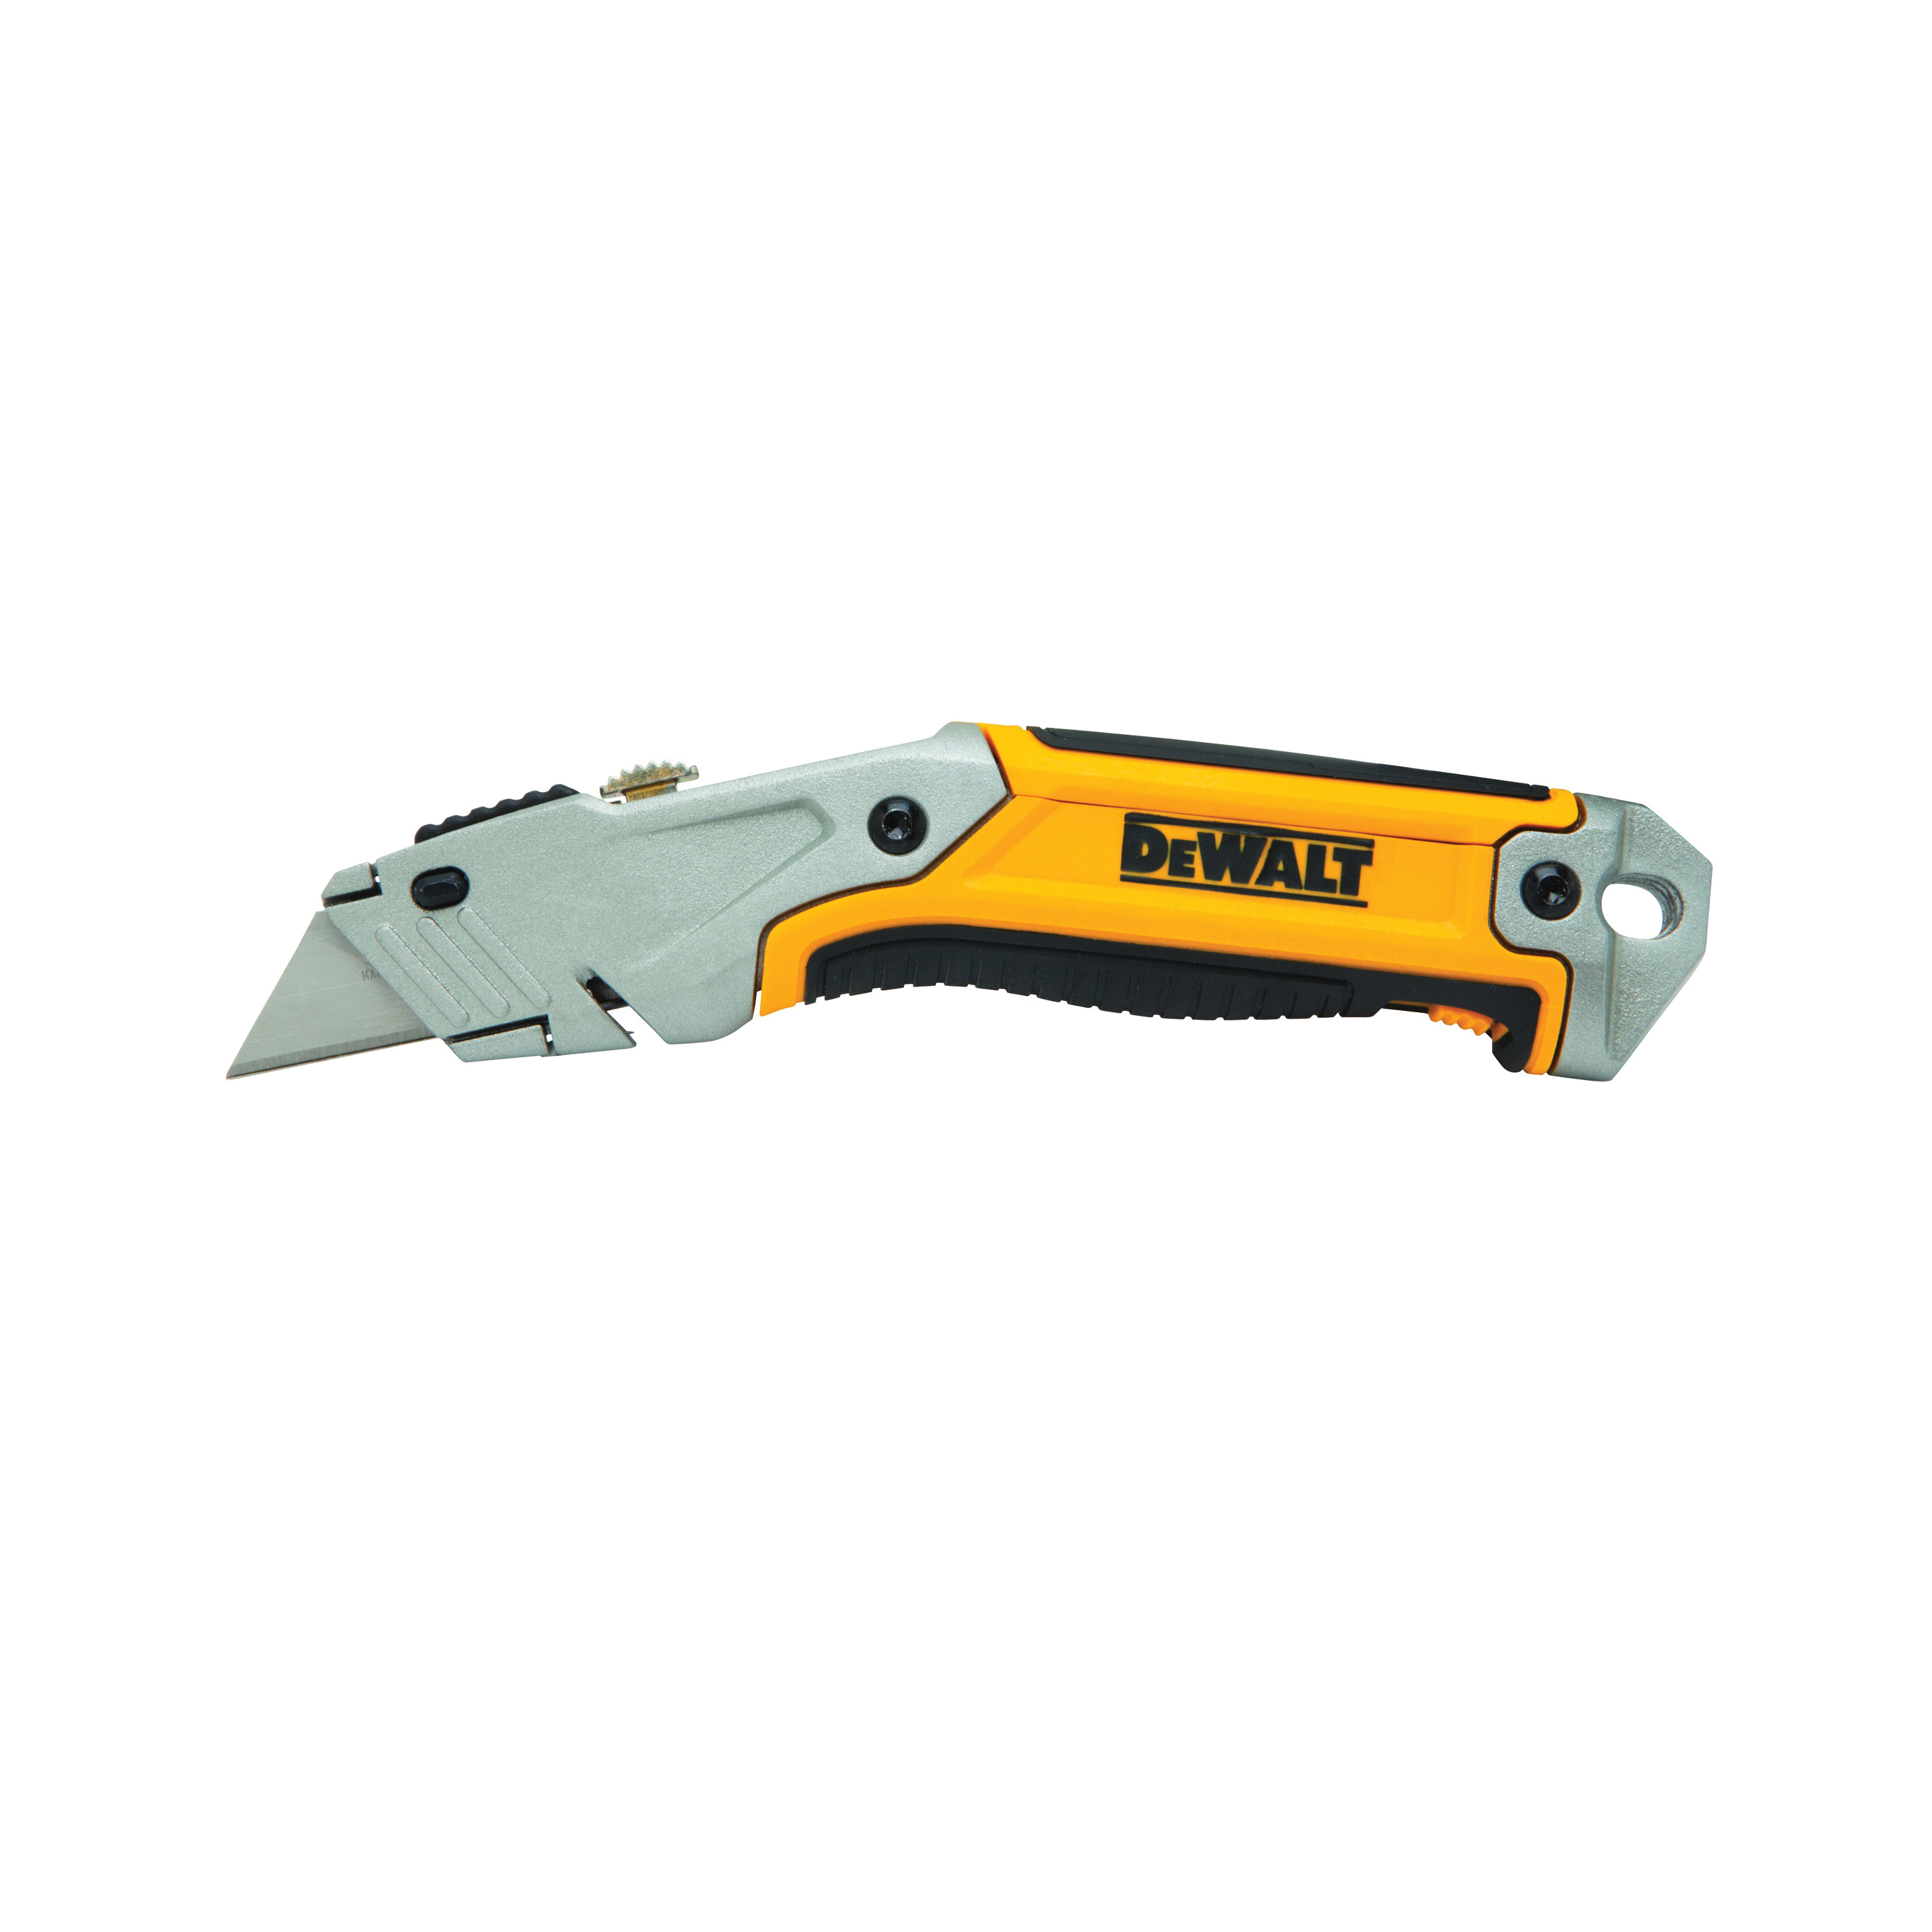 DeWALT® DWHT10046 Utility Knife, Retractable Snap-Off Blade, Quick-Change, Carbon Steel Blade, 3 Blades Included, 6-3/4 in OAL